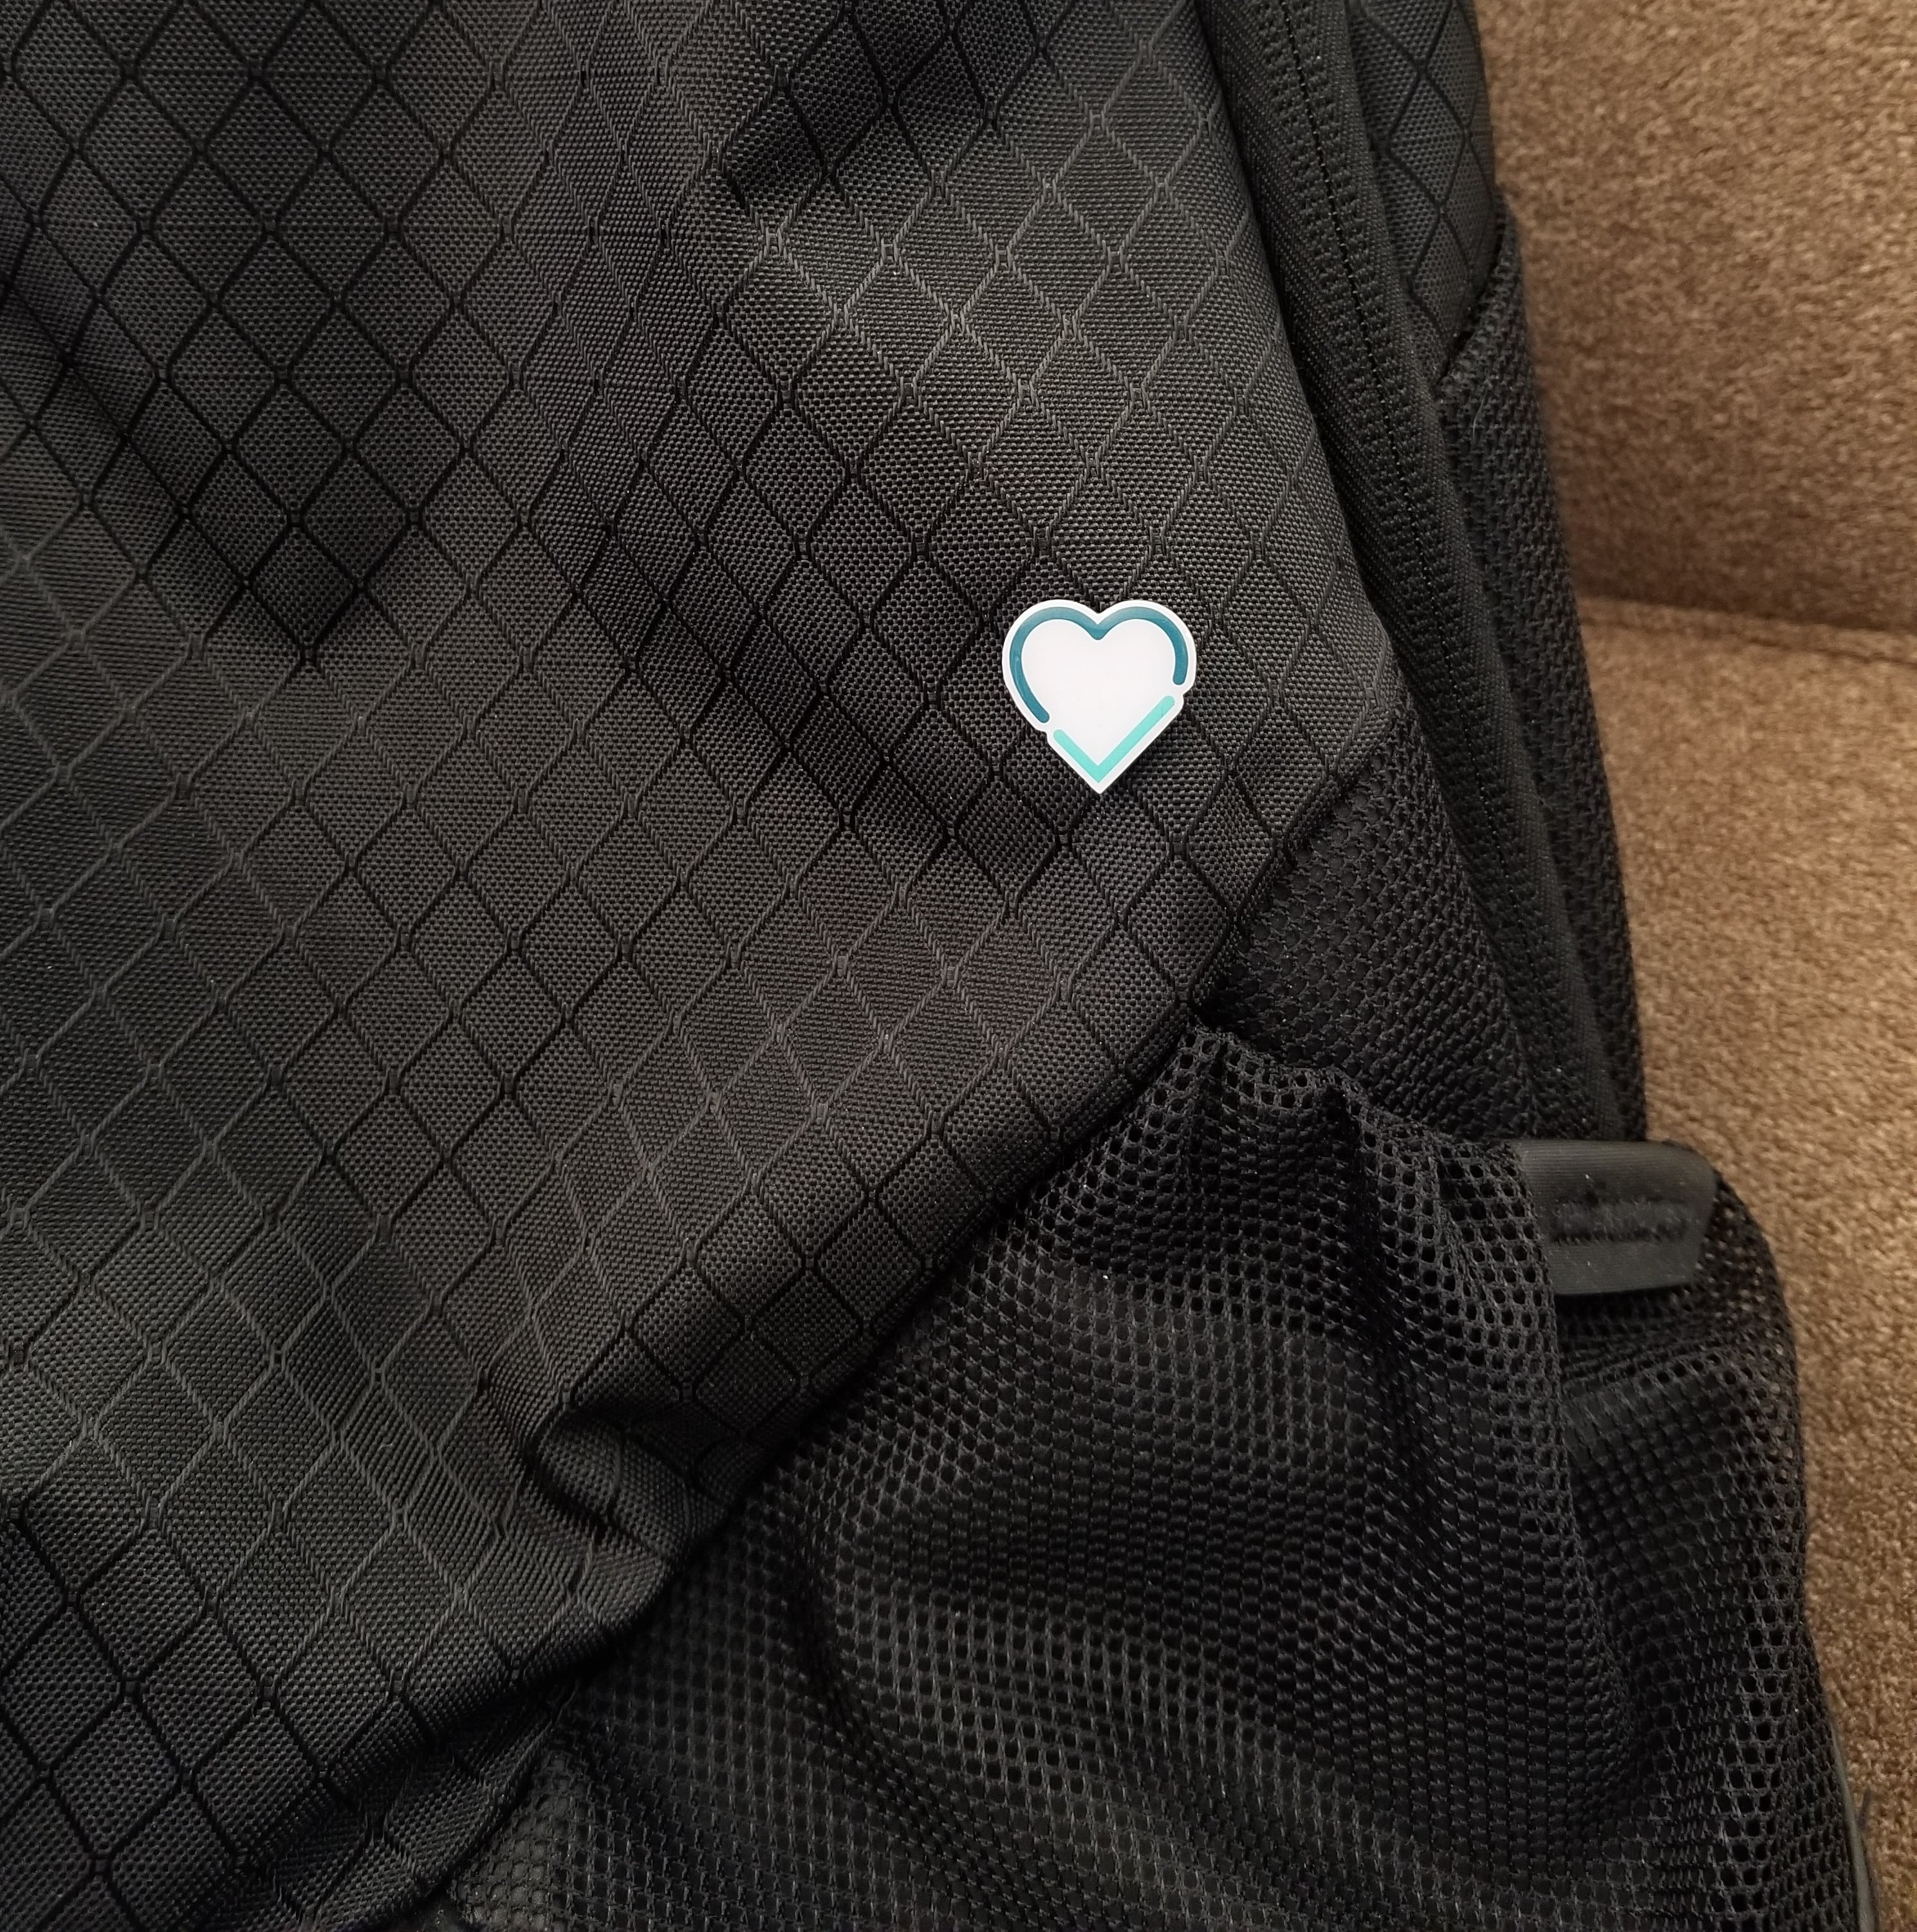 Sample pin shown on backpack